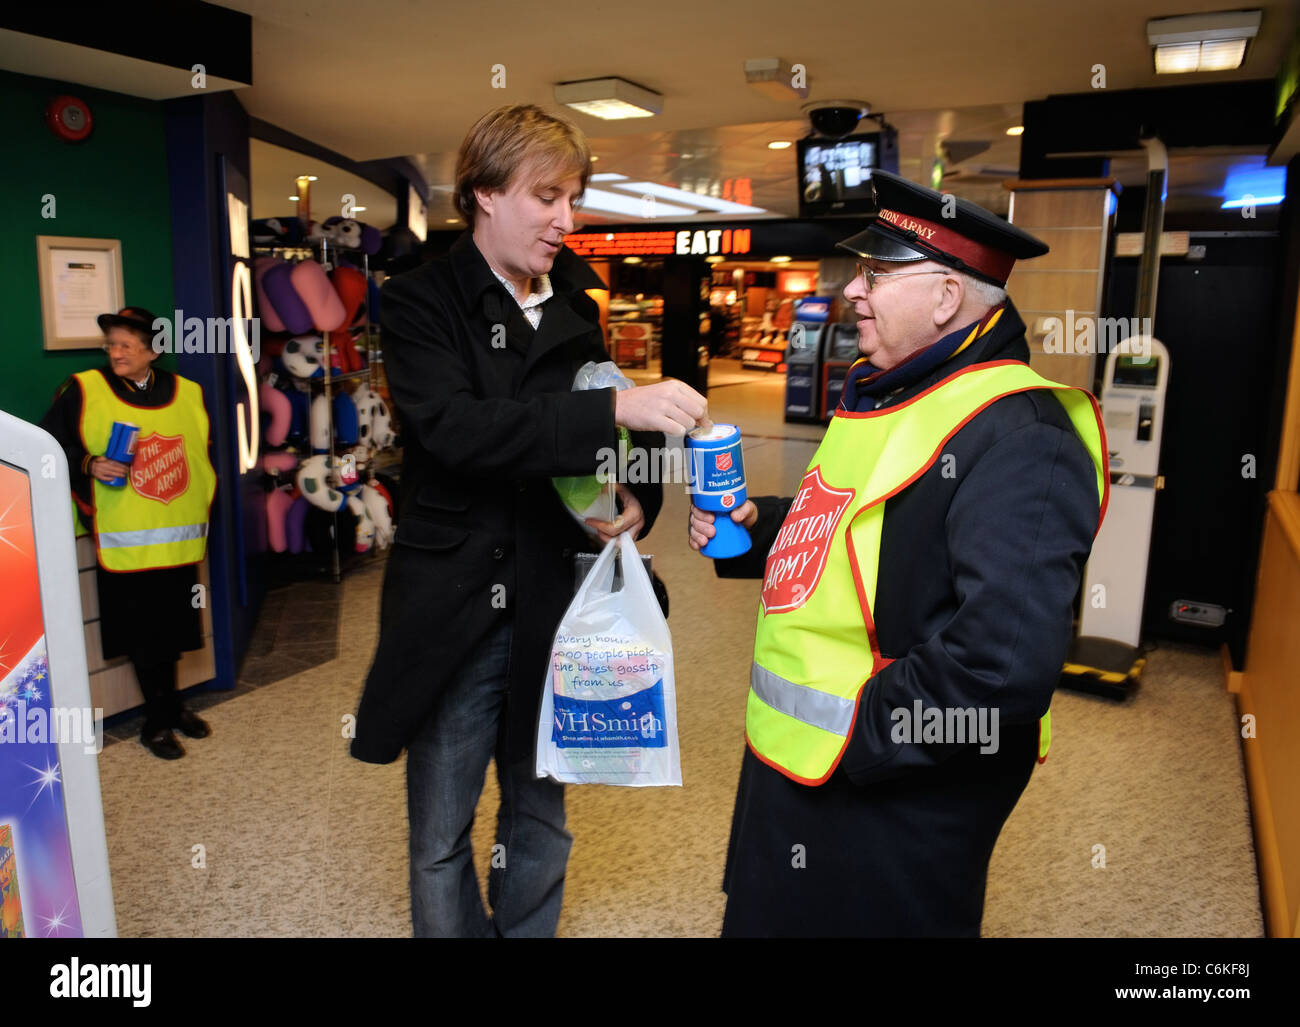 The Salvation Army collecting at a motorway service station Dec 2008 UK Stock Photo